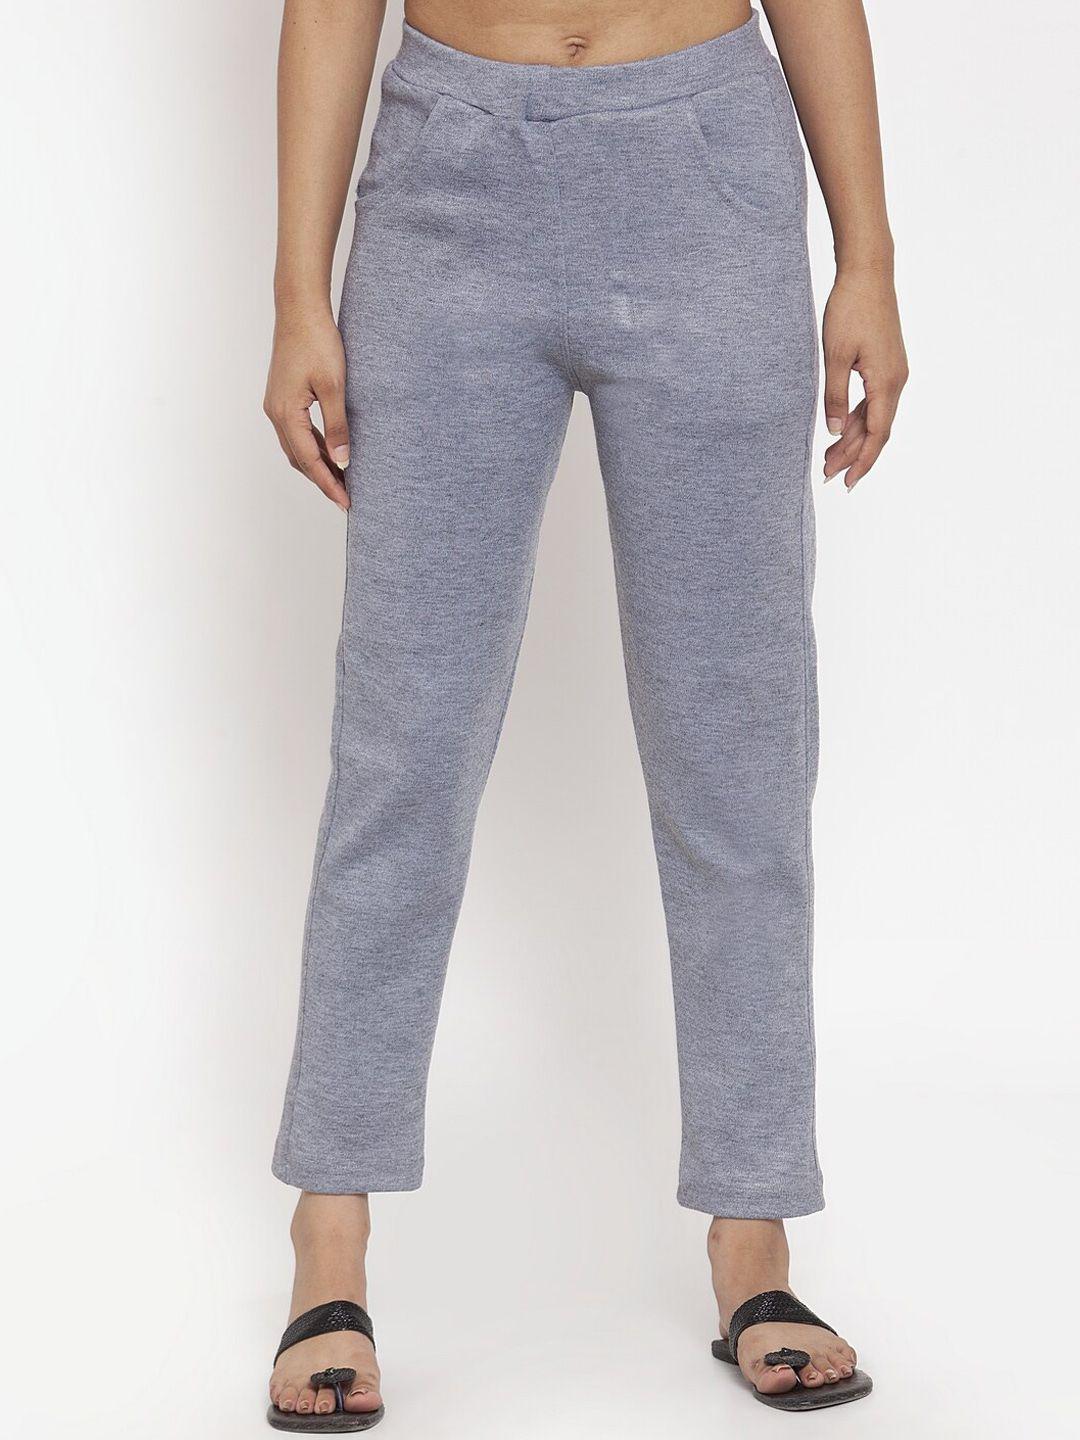 tag 7 women grey ethnic cigarette trousers